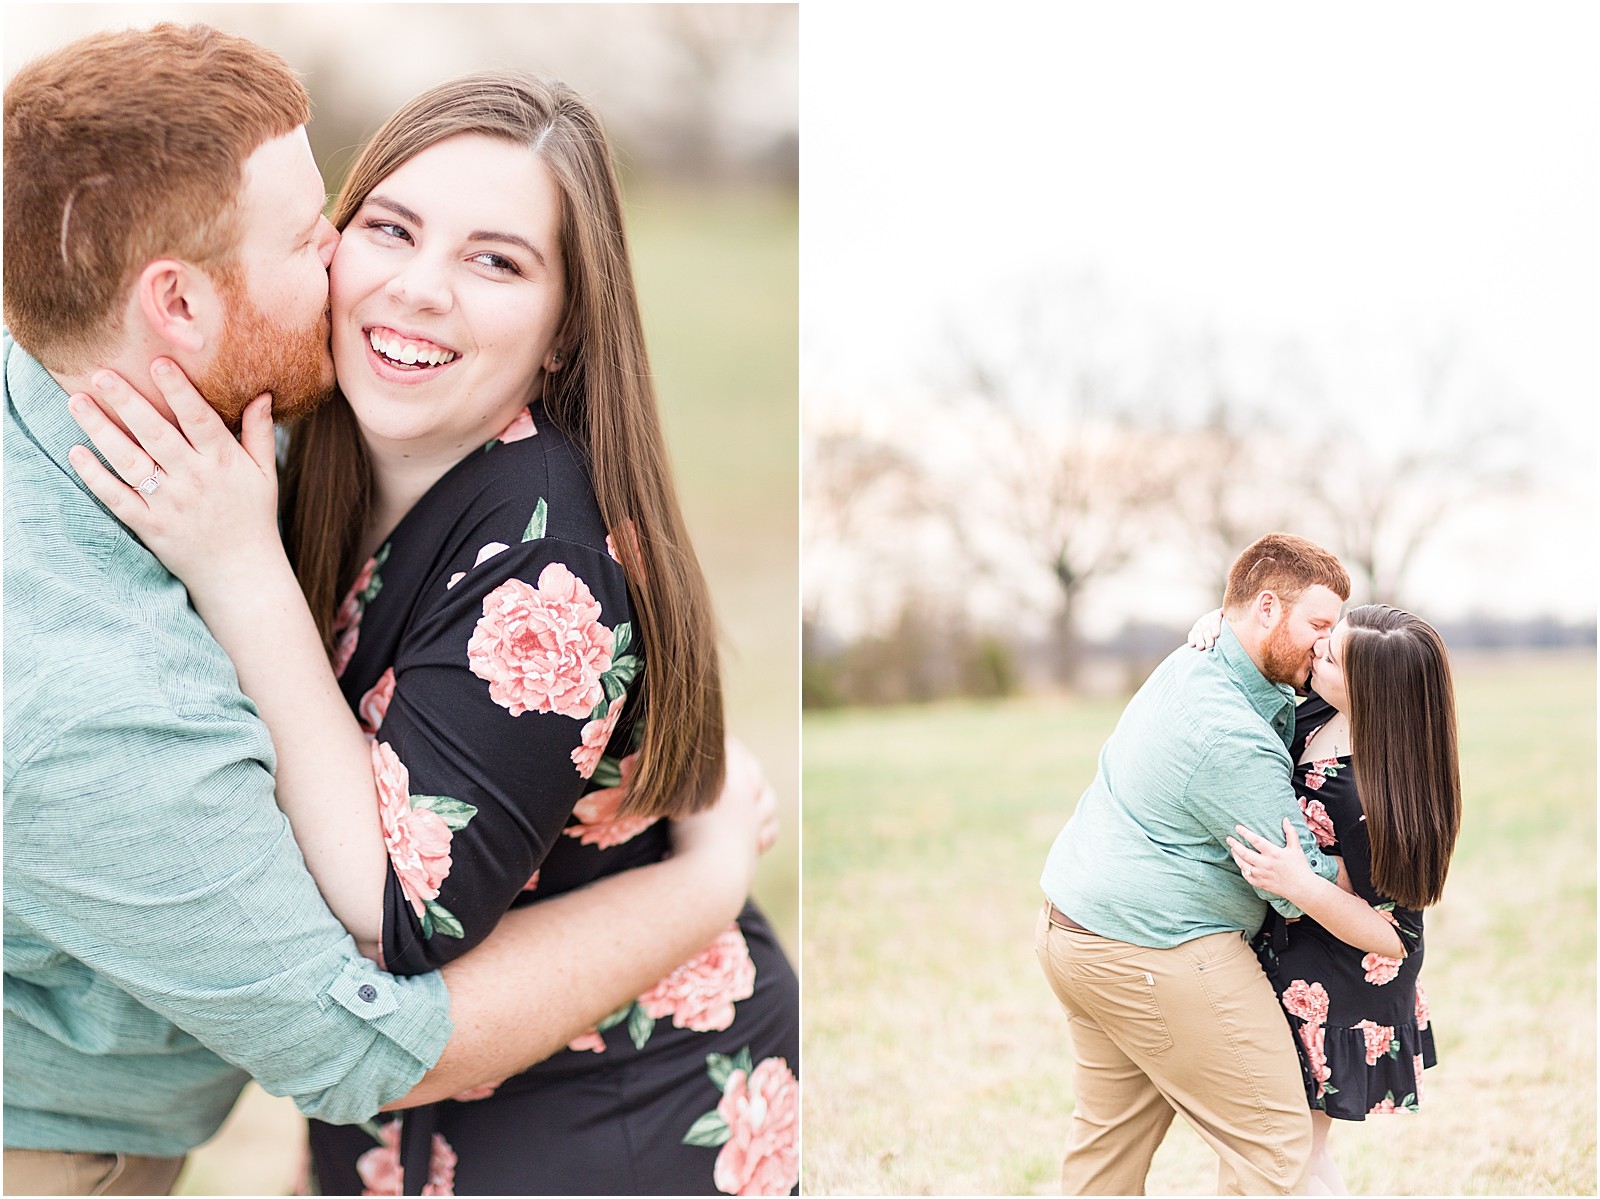 Jocelyn and Austin | Rockport Indiana Engament Session015.jpg